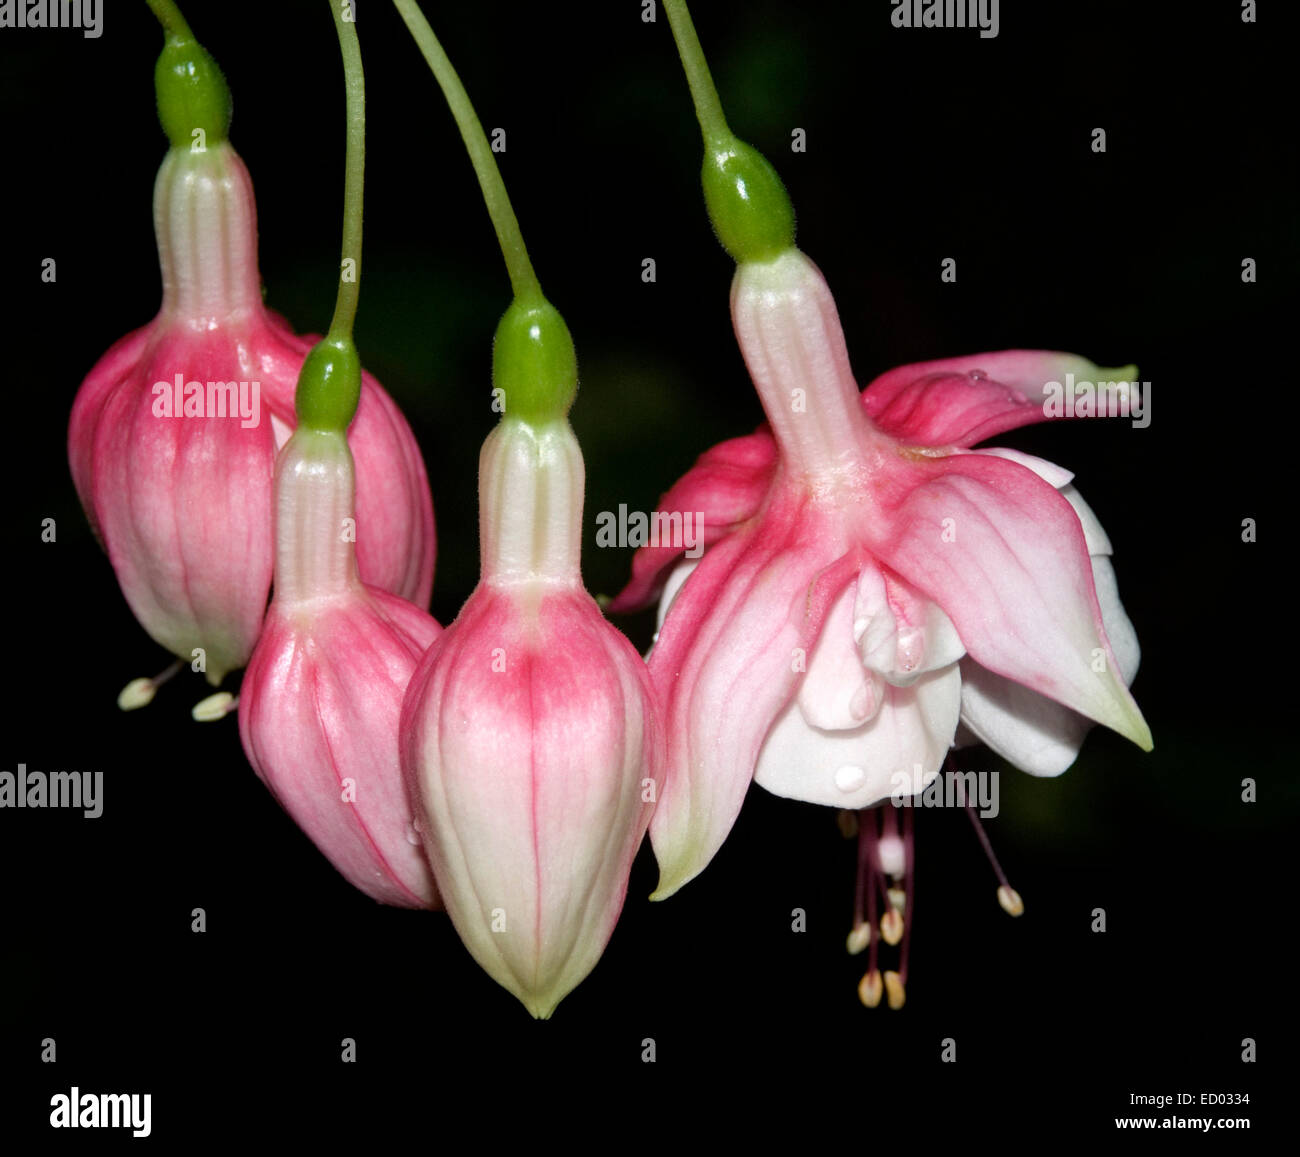 Cluster of beautiful pink and white flowers and buds of Fuchsia 'Swing-a-long' against black background Stock Photo